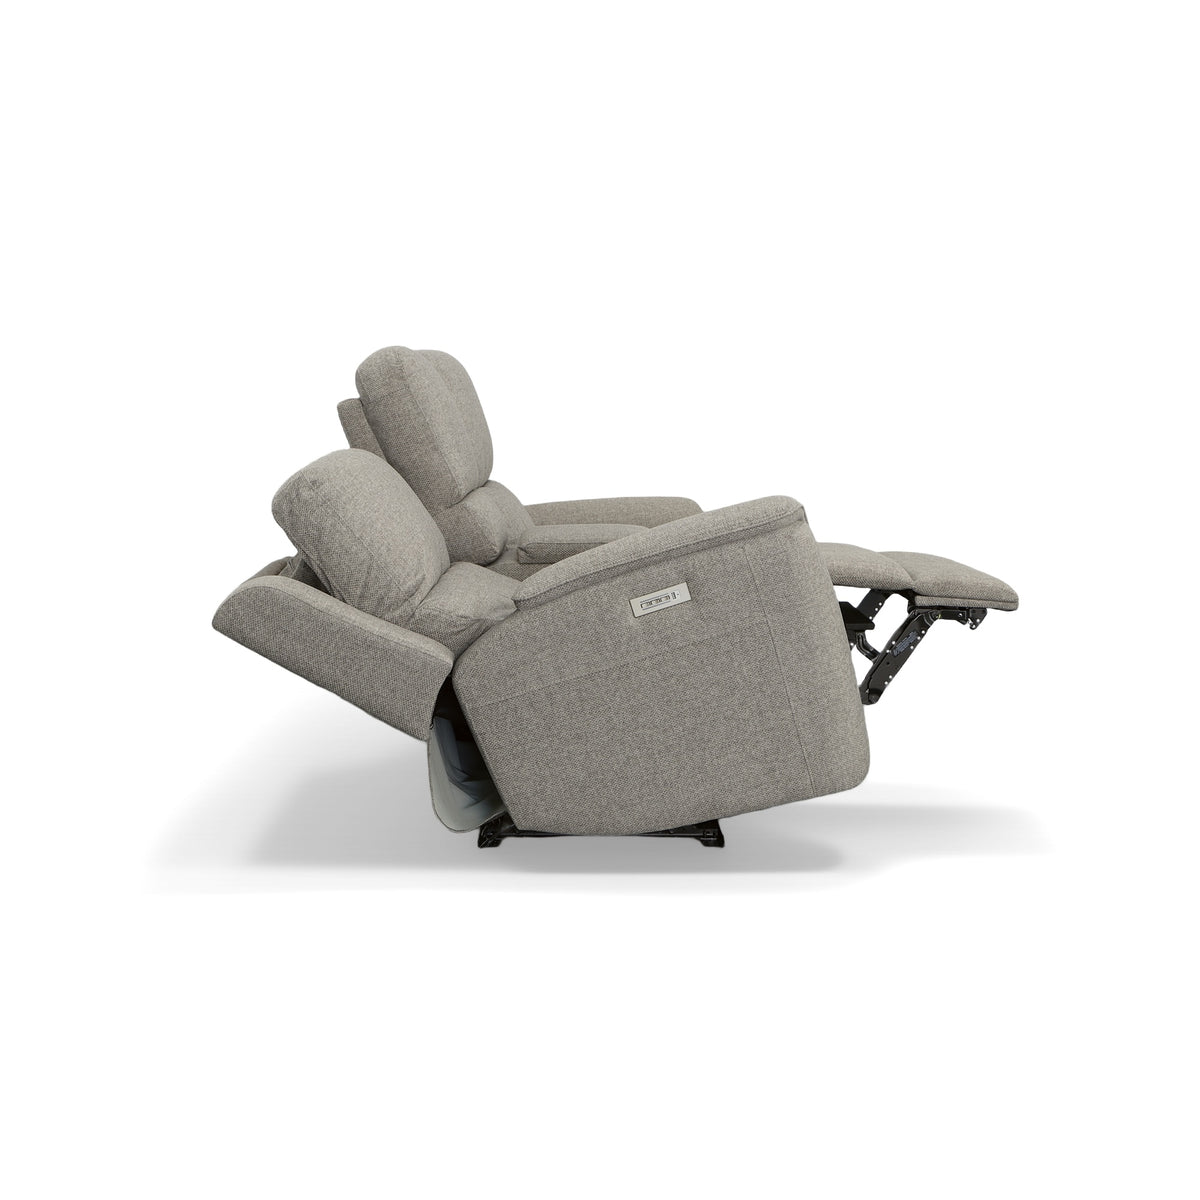 Henry Power Reclining Loveseat with Console & Power Headrests & Lumbar